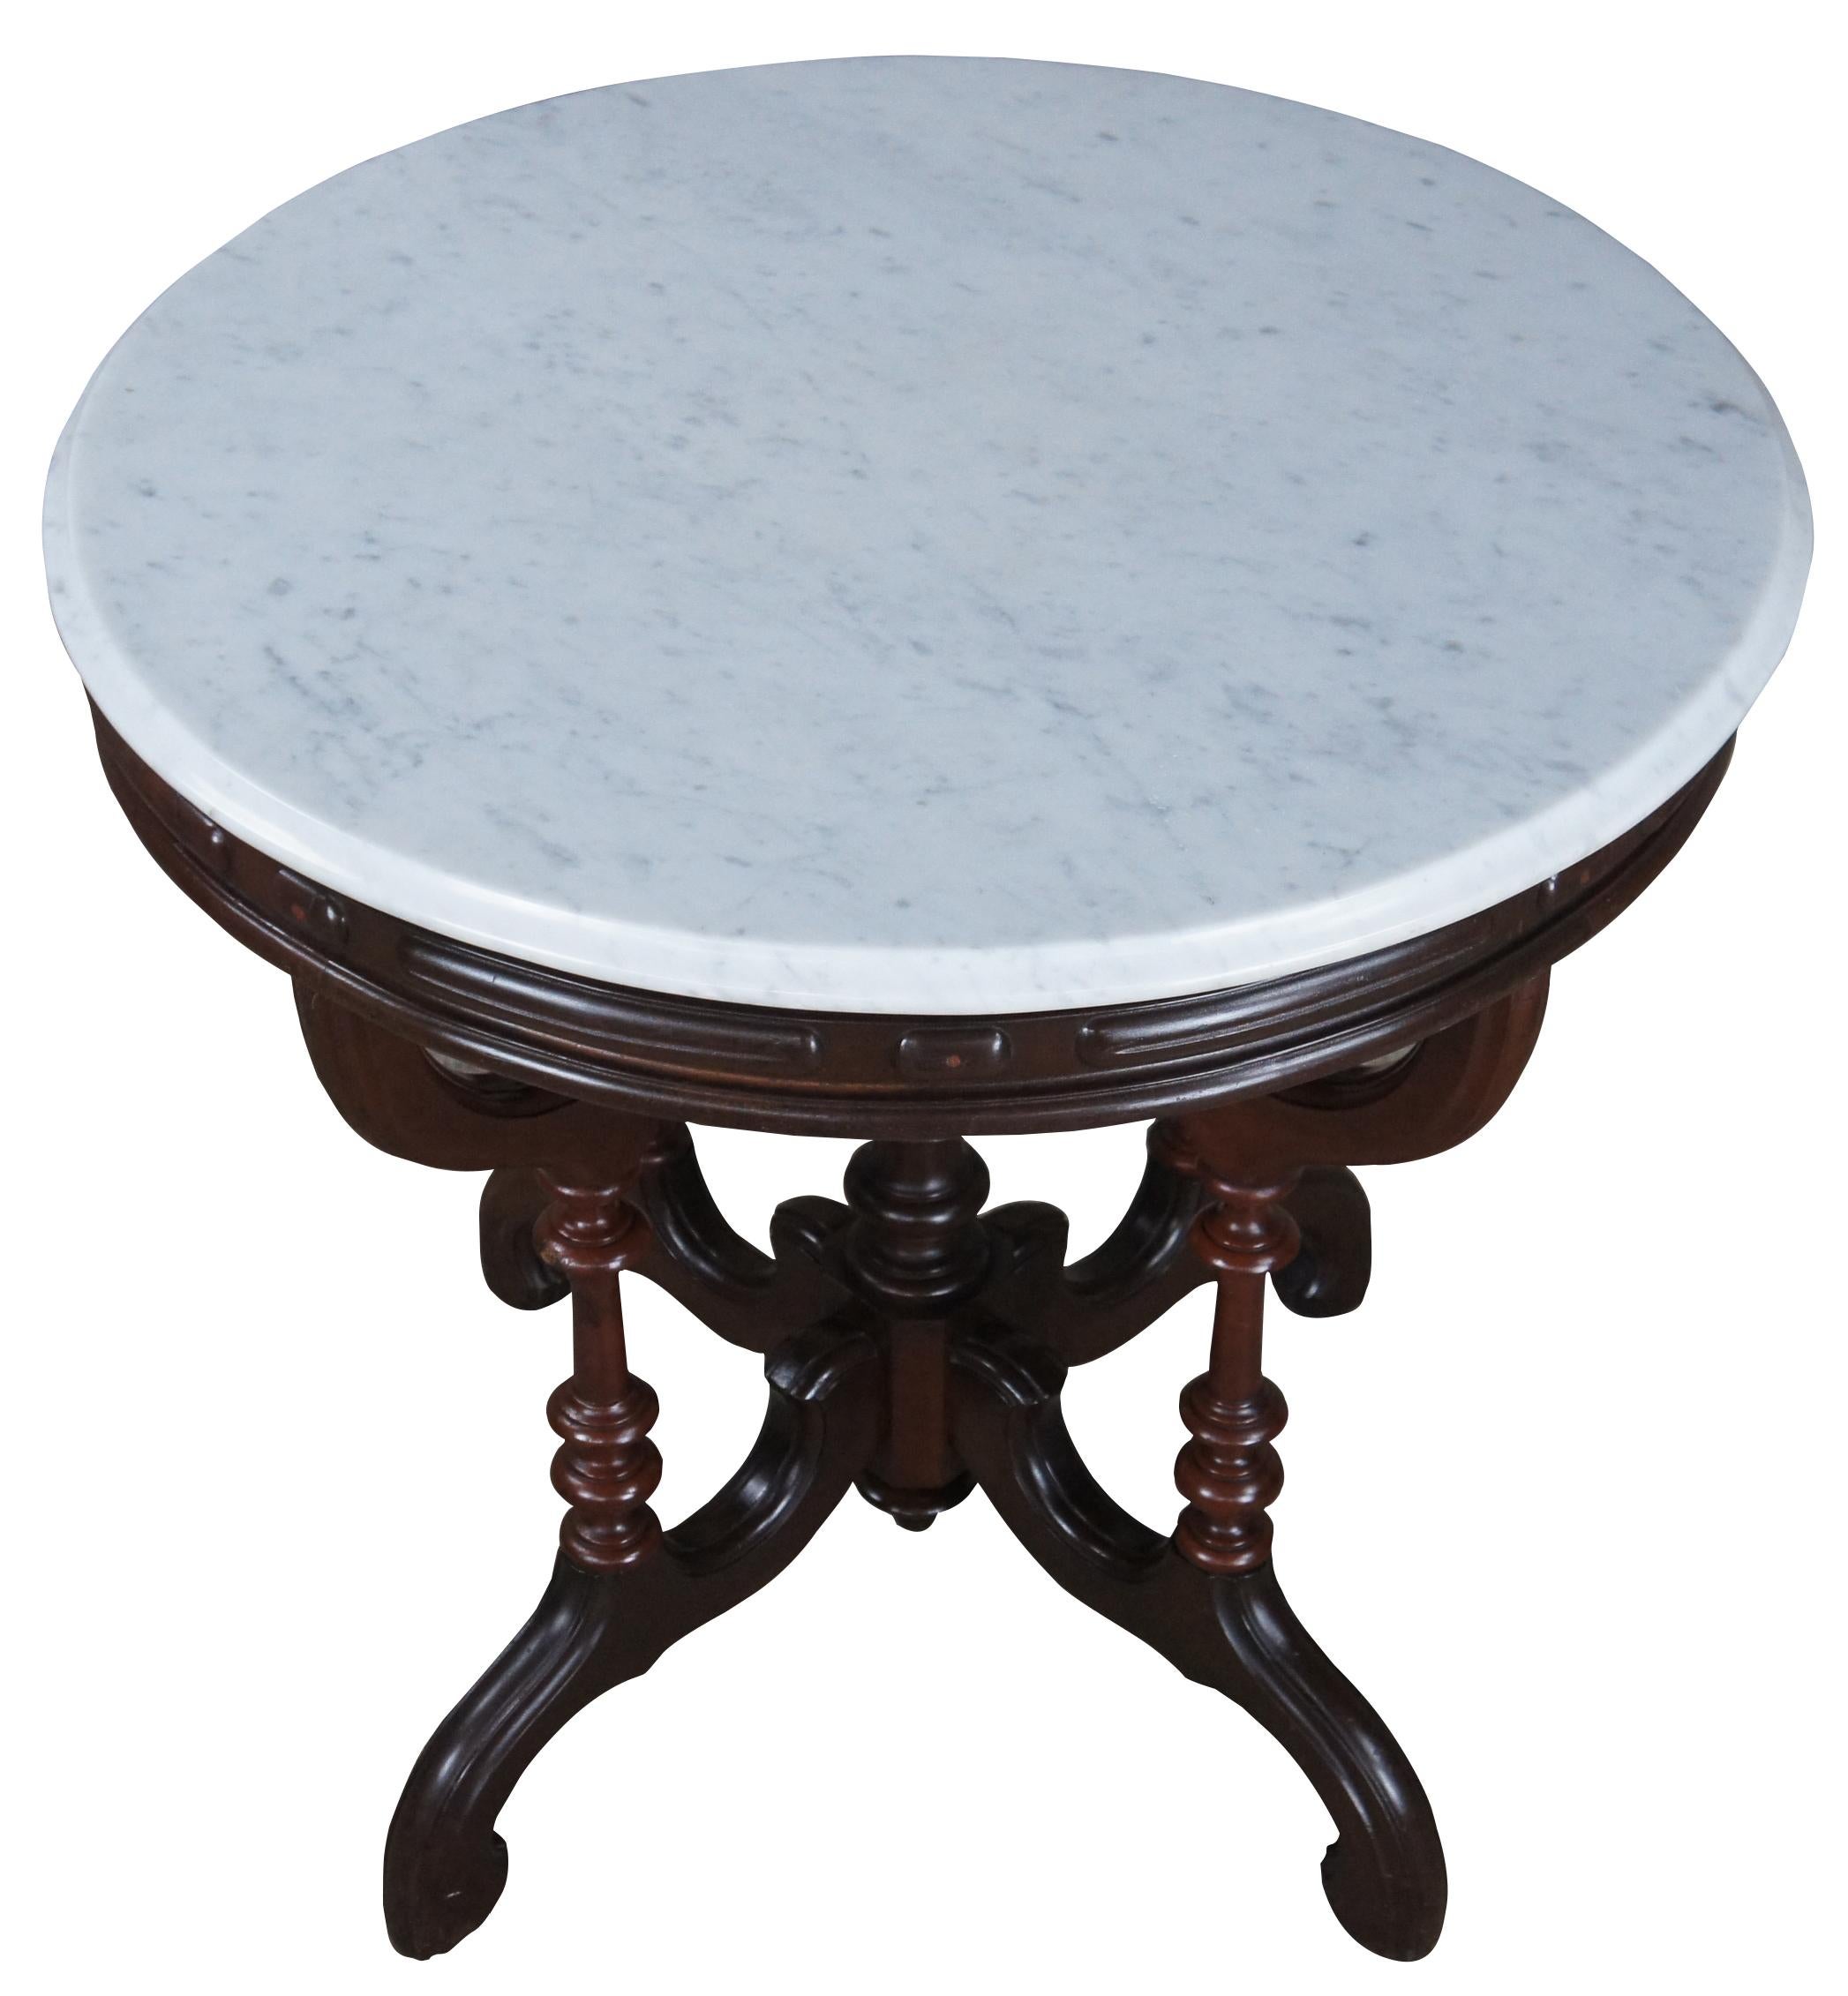 Antique Victorian parlor center table from J.H. Crane of Saint Louis Mo. Made of walnut featuring round form with white marble top and serpentine shaped base with turned posts. Size: 30